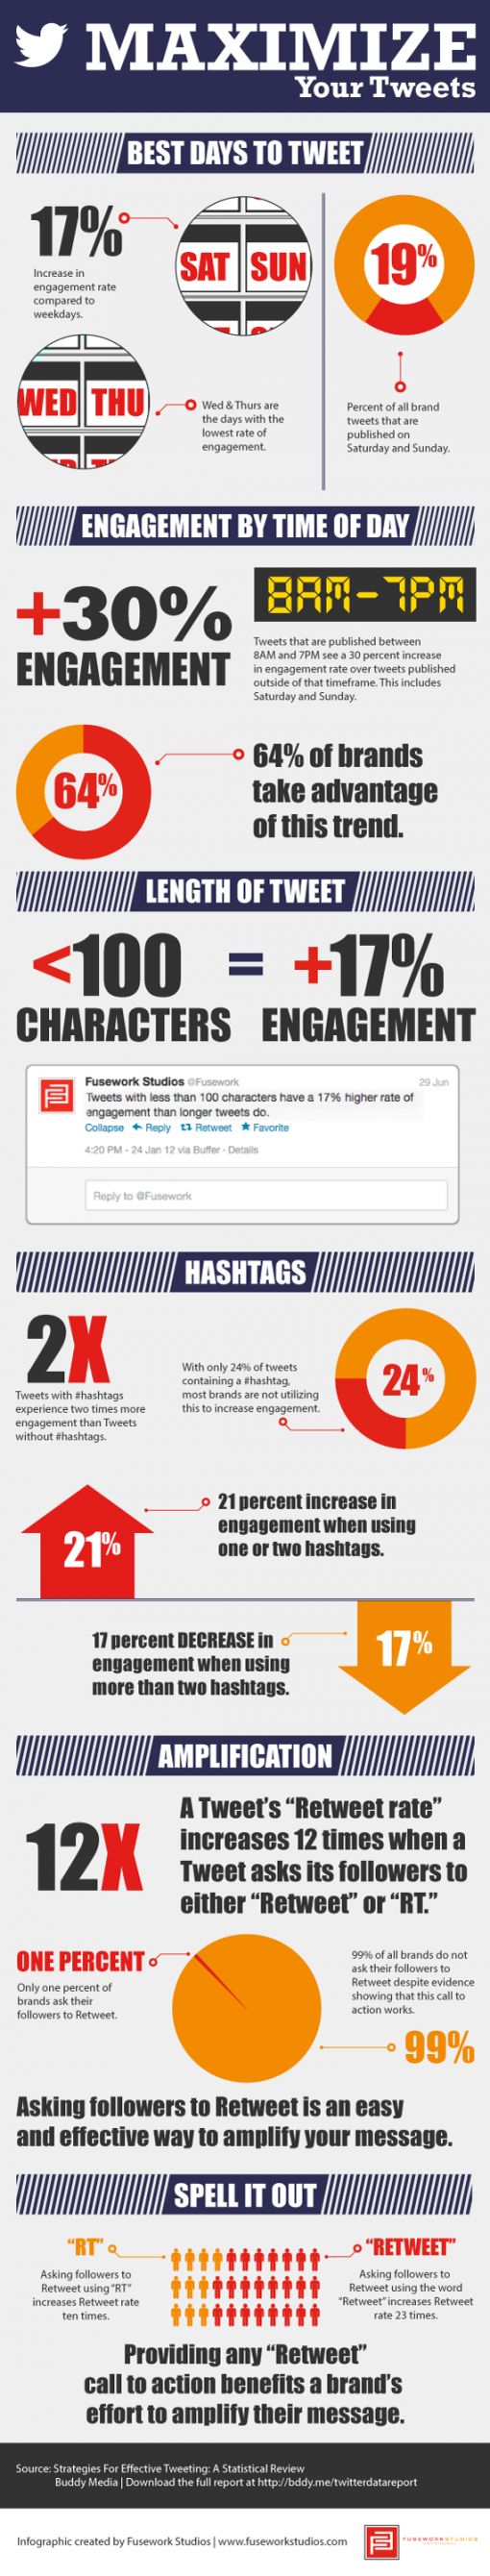 maximizing-your-tweets-infographic